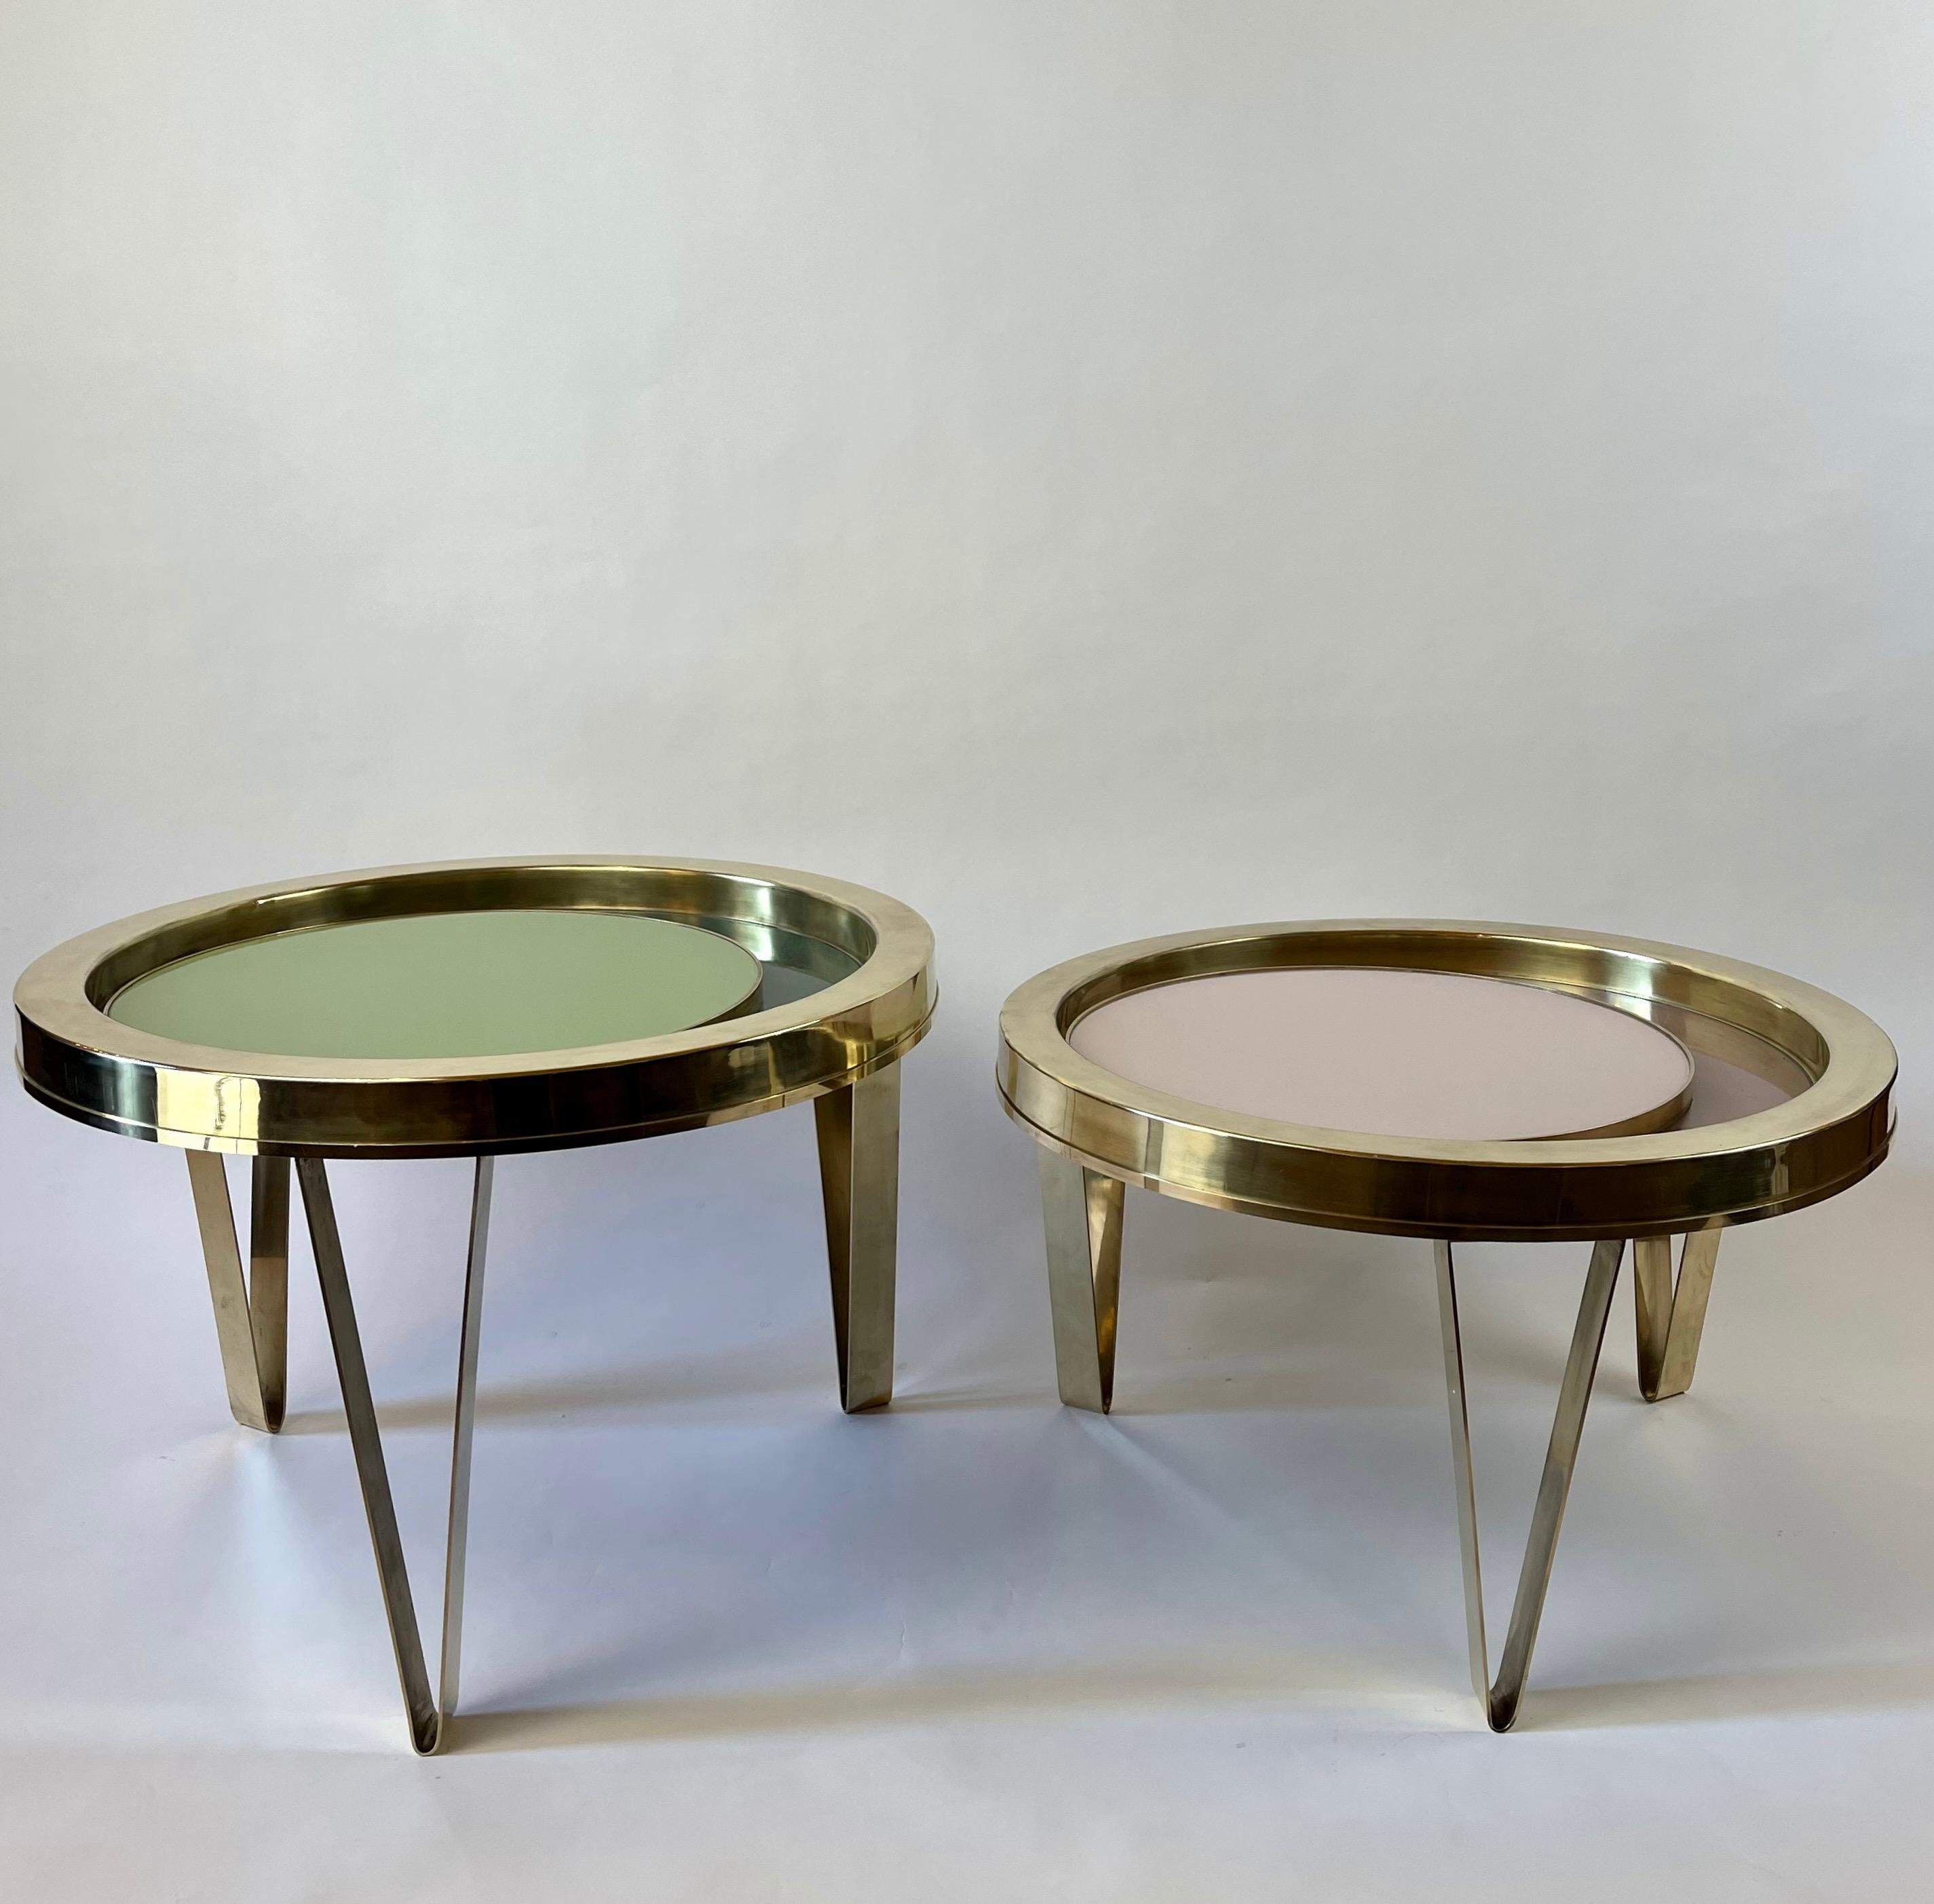 The coffee tables can partially overlaid one another.
Color combinations:
Table size: 70 diameter x 49 height cm. - Green grass & emerald green
Table size: 70 diameter x 42 height cm. - Mauve & powder pink.
    